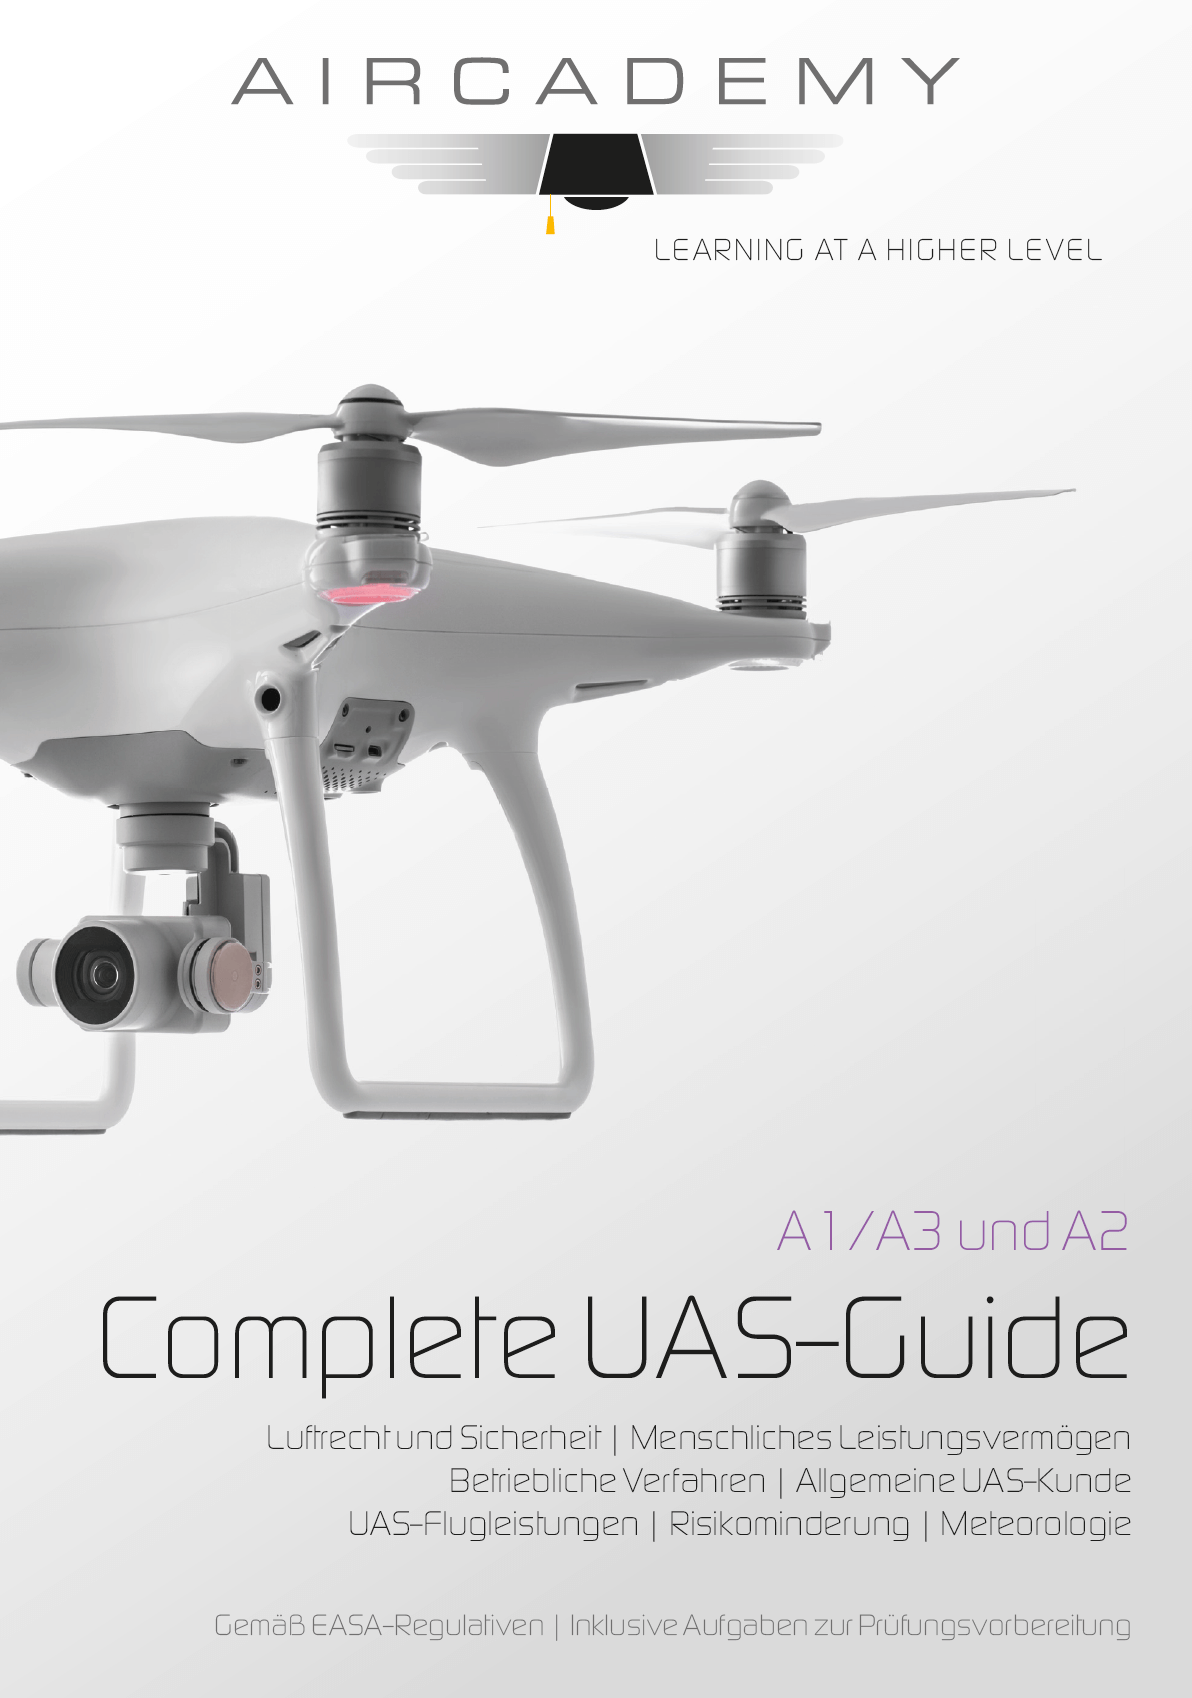 Aircademy Complete UAS-Guide 